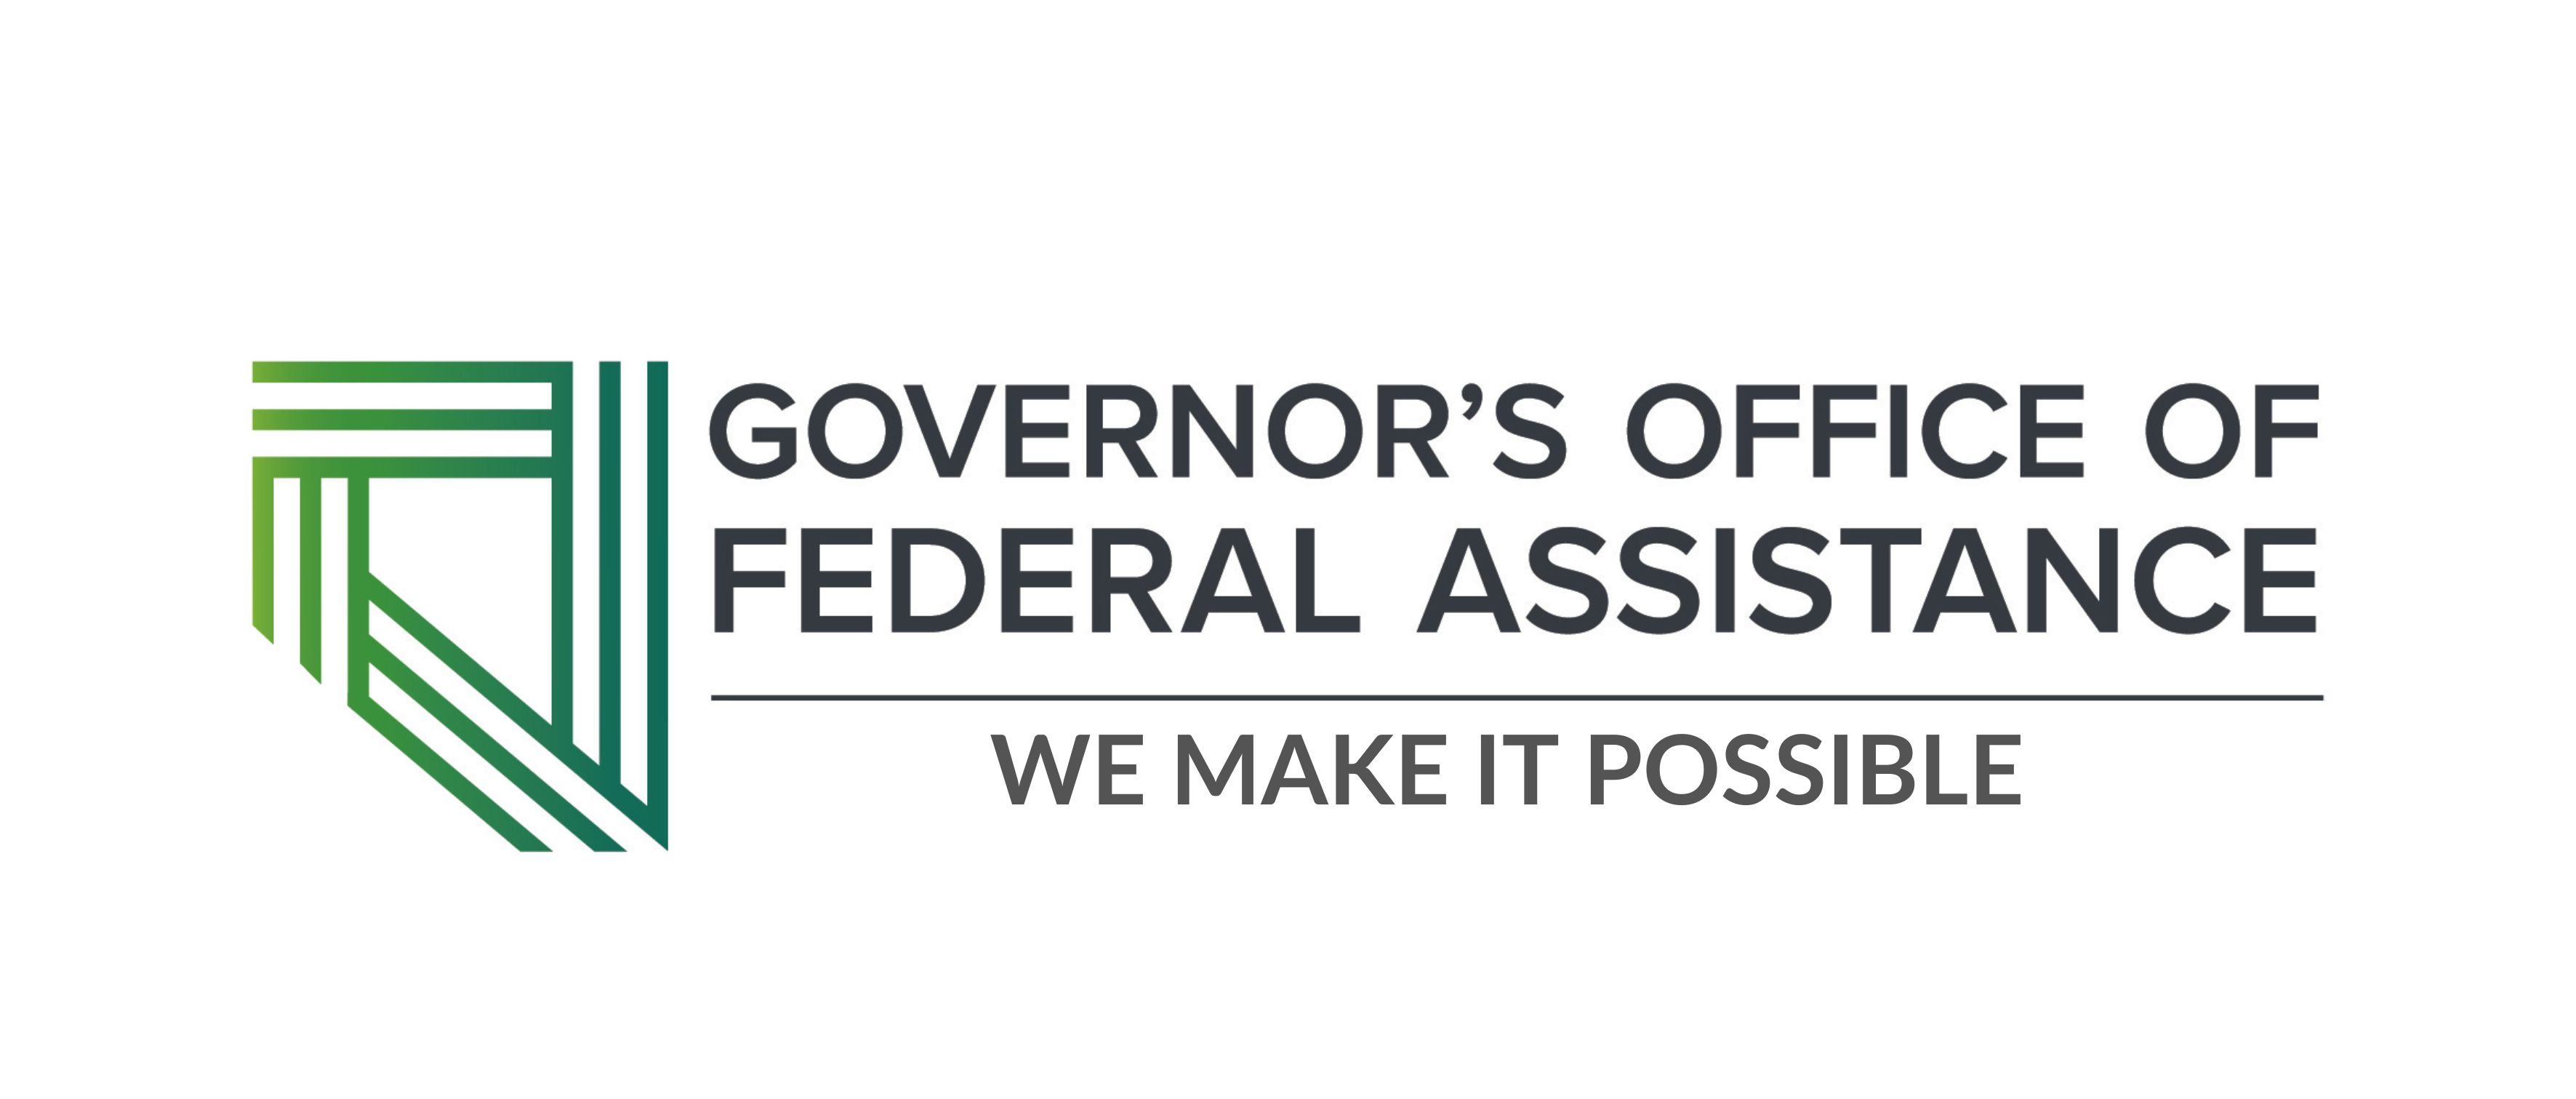 Governor's Office of Federal Assistance